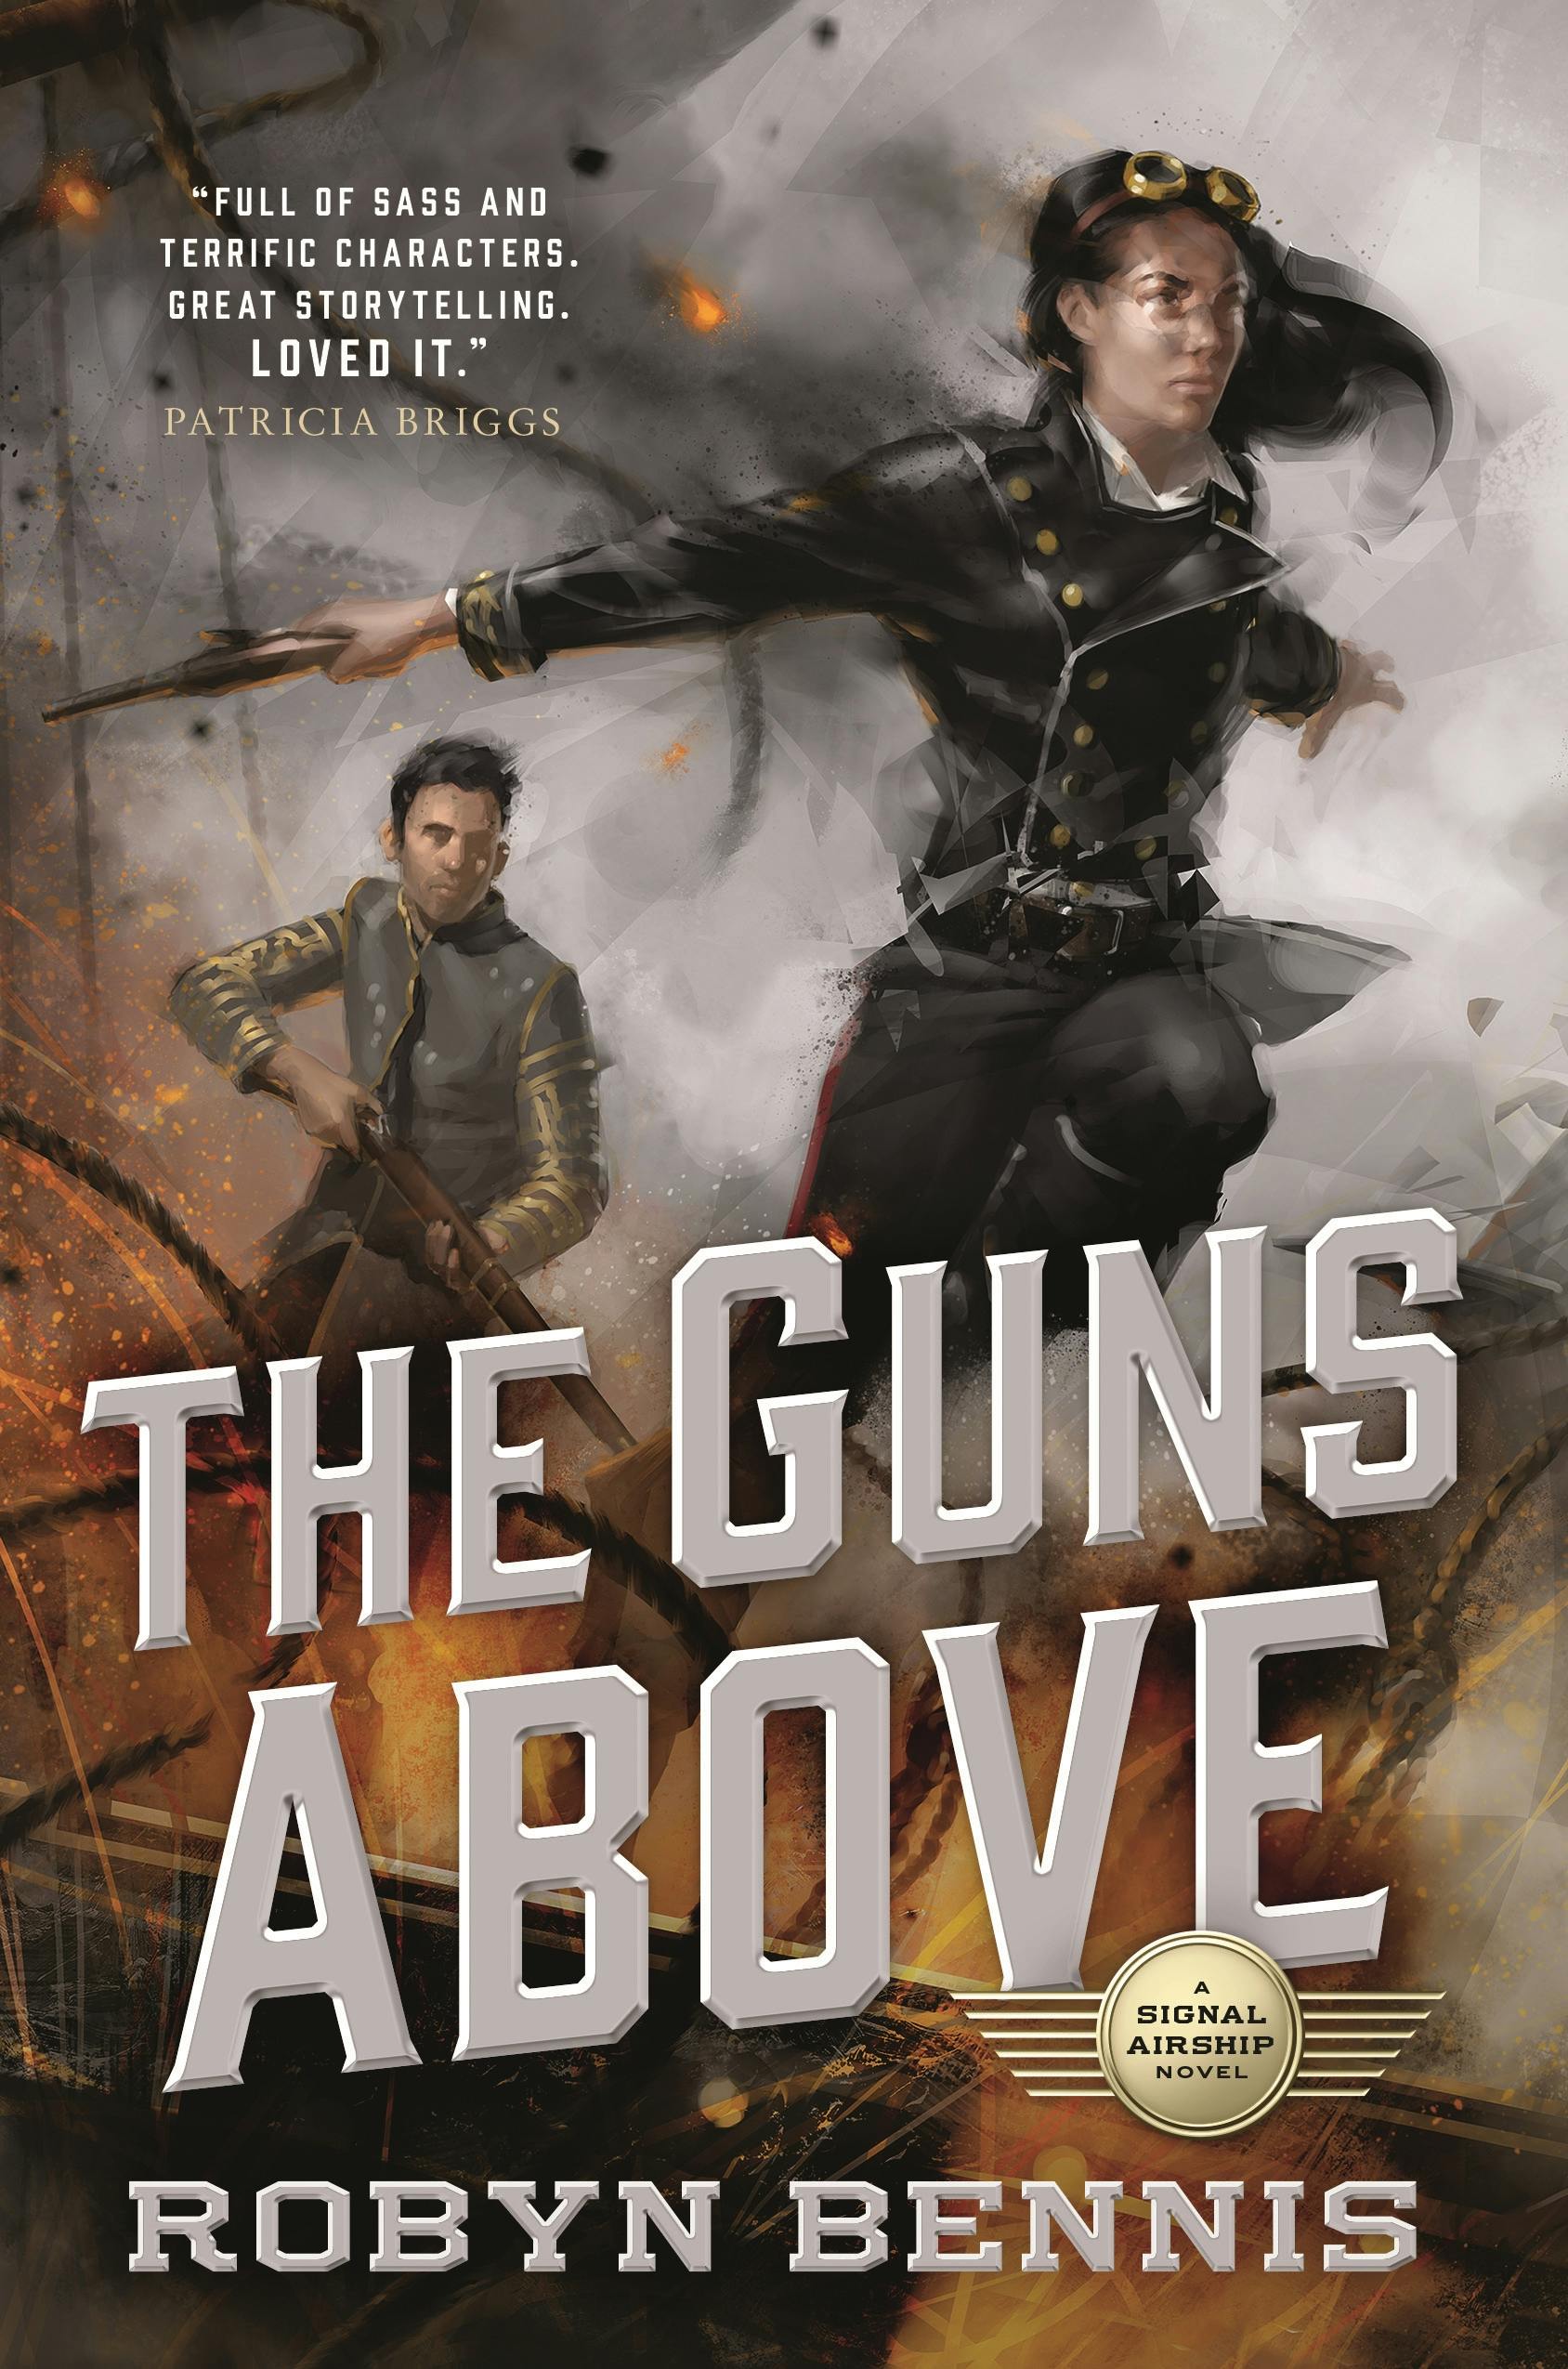 Cover for the book titled as: The Guns Above